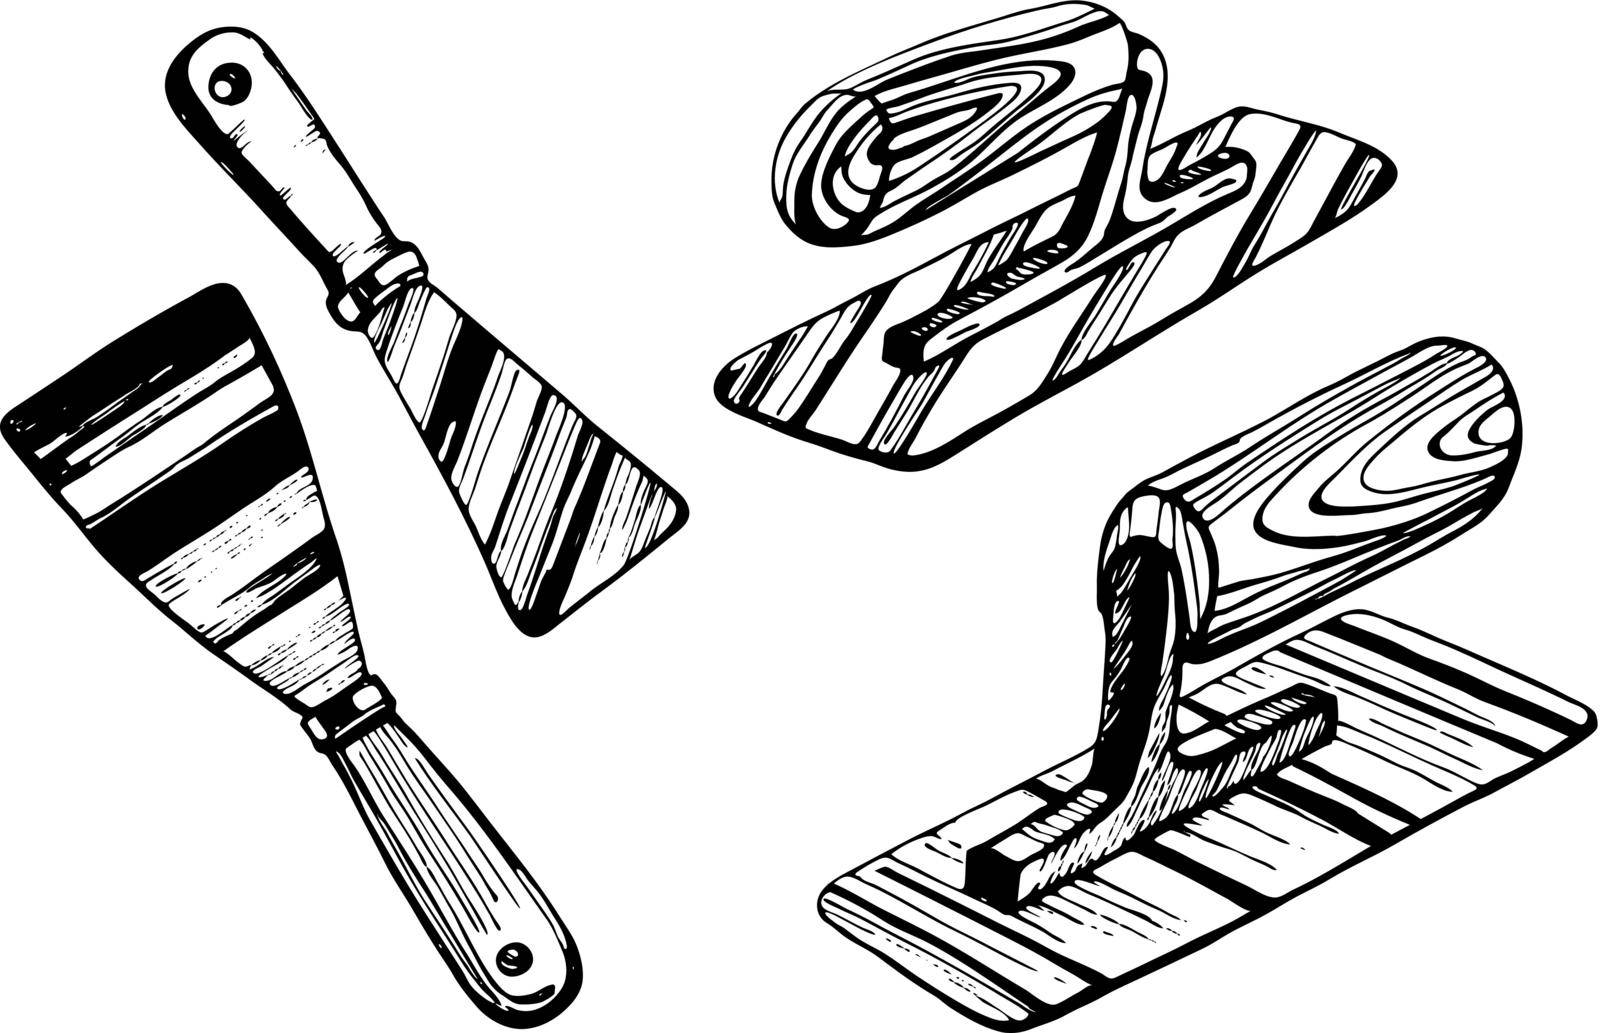 Tools for applying Venetian plaster. Trowel and auxiliary trowel. Hand drawn vector sketch.